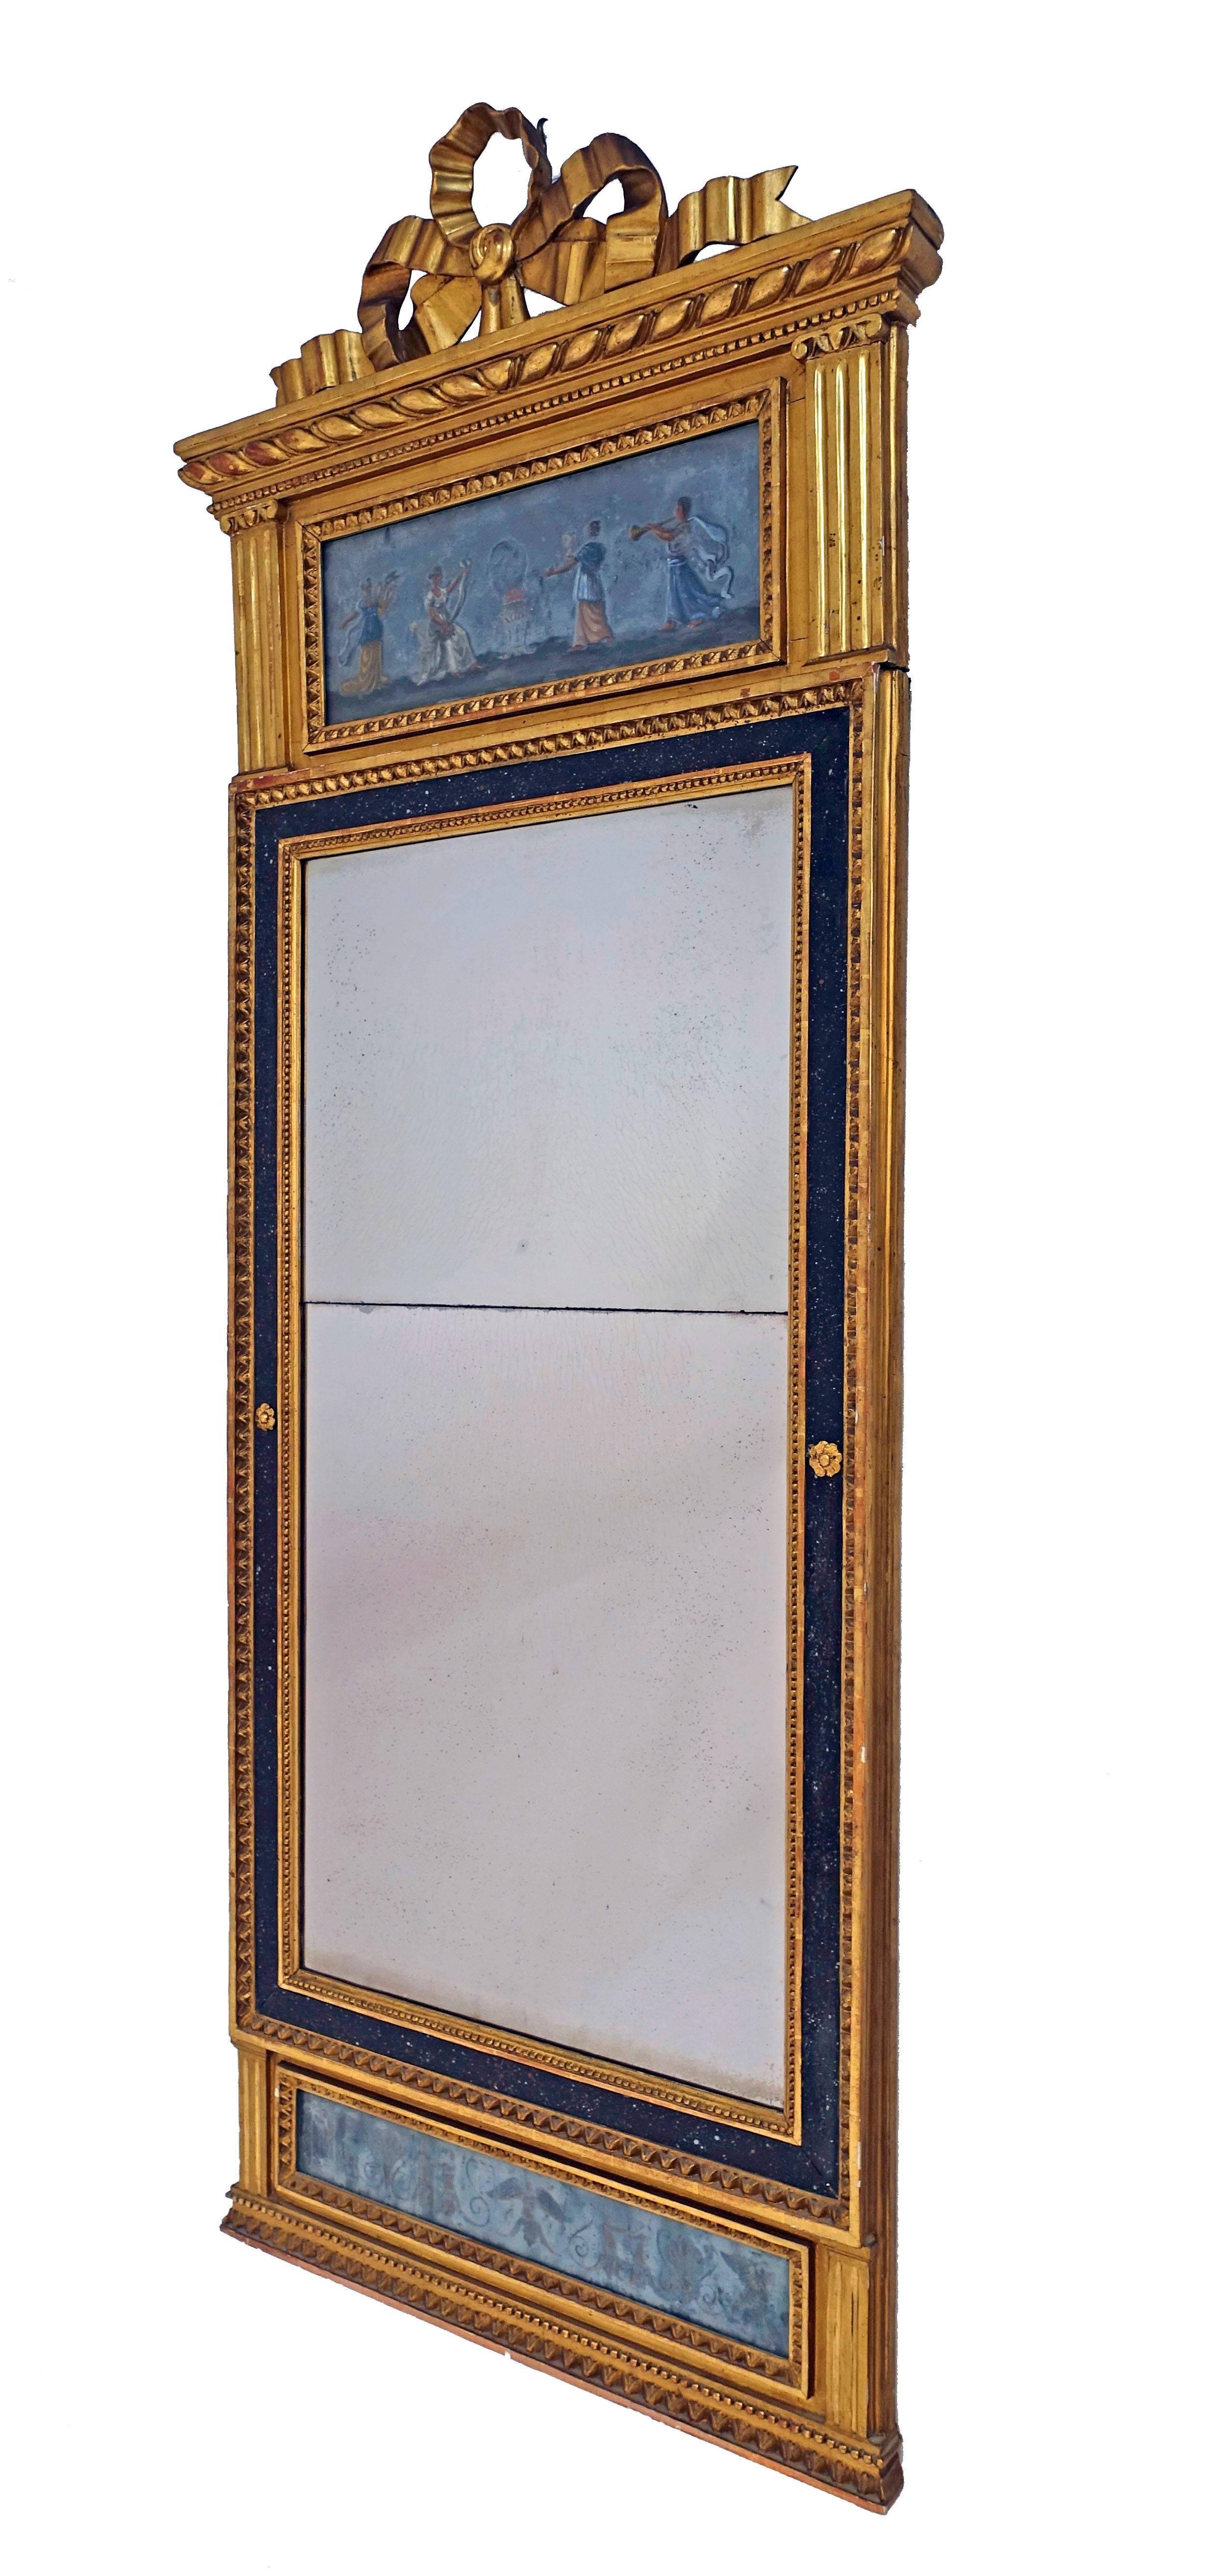 Neoclassical carved and giltwood frame with églomisé ‘reverse hand-painted glass panels’ at the top, bottom and surrounding periphery, and having original period mirror. In beautiful original condition. France, late 18th-early 19th century.